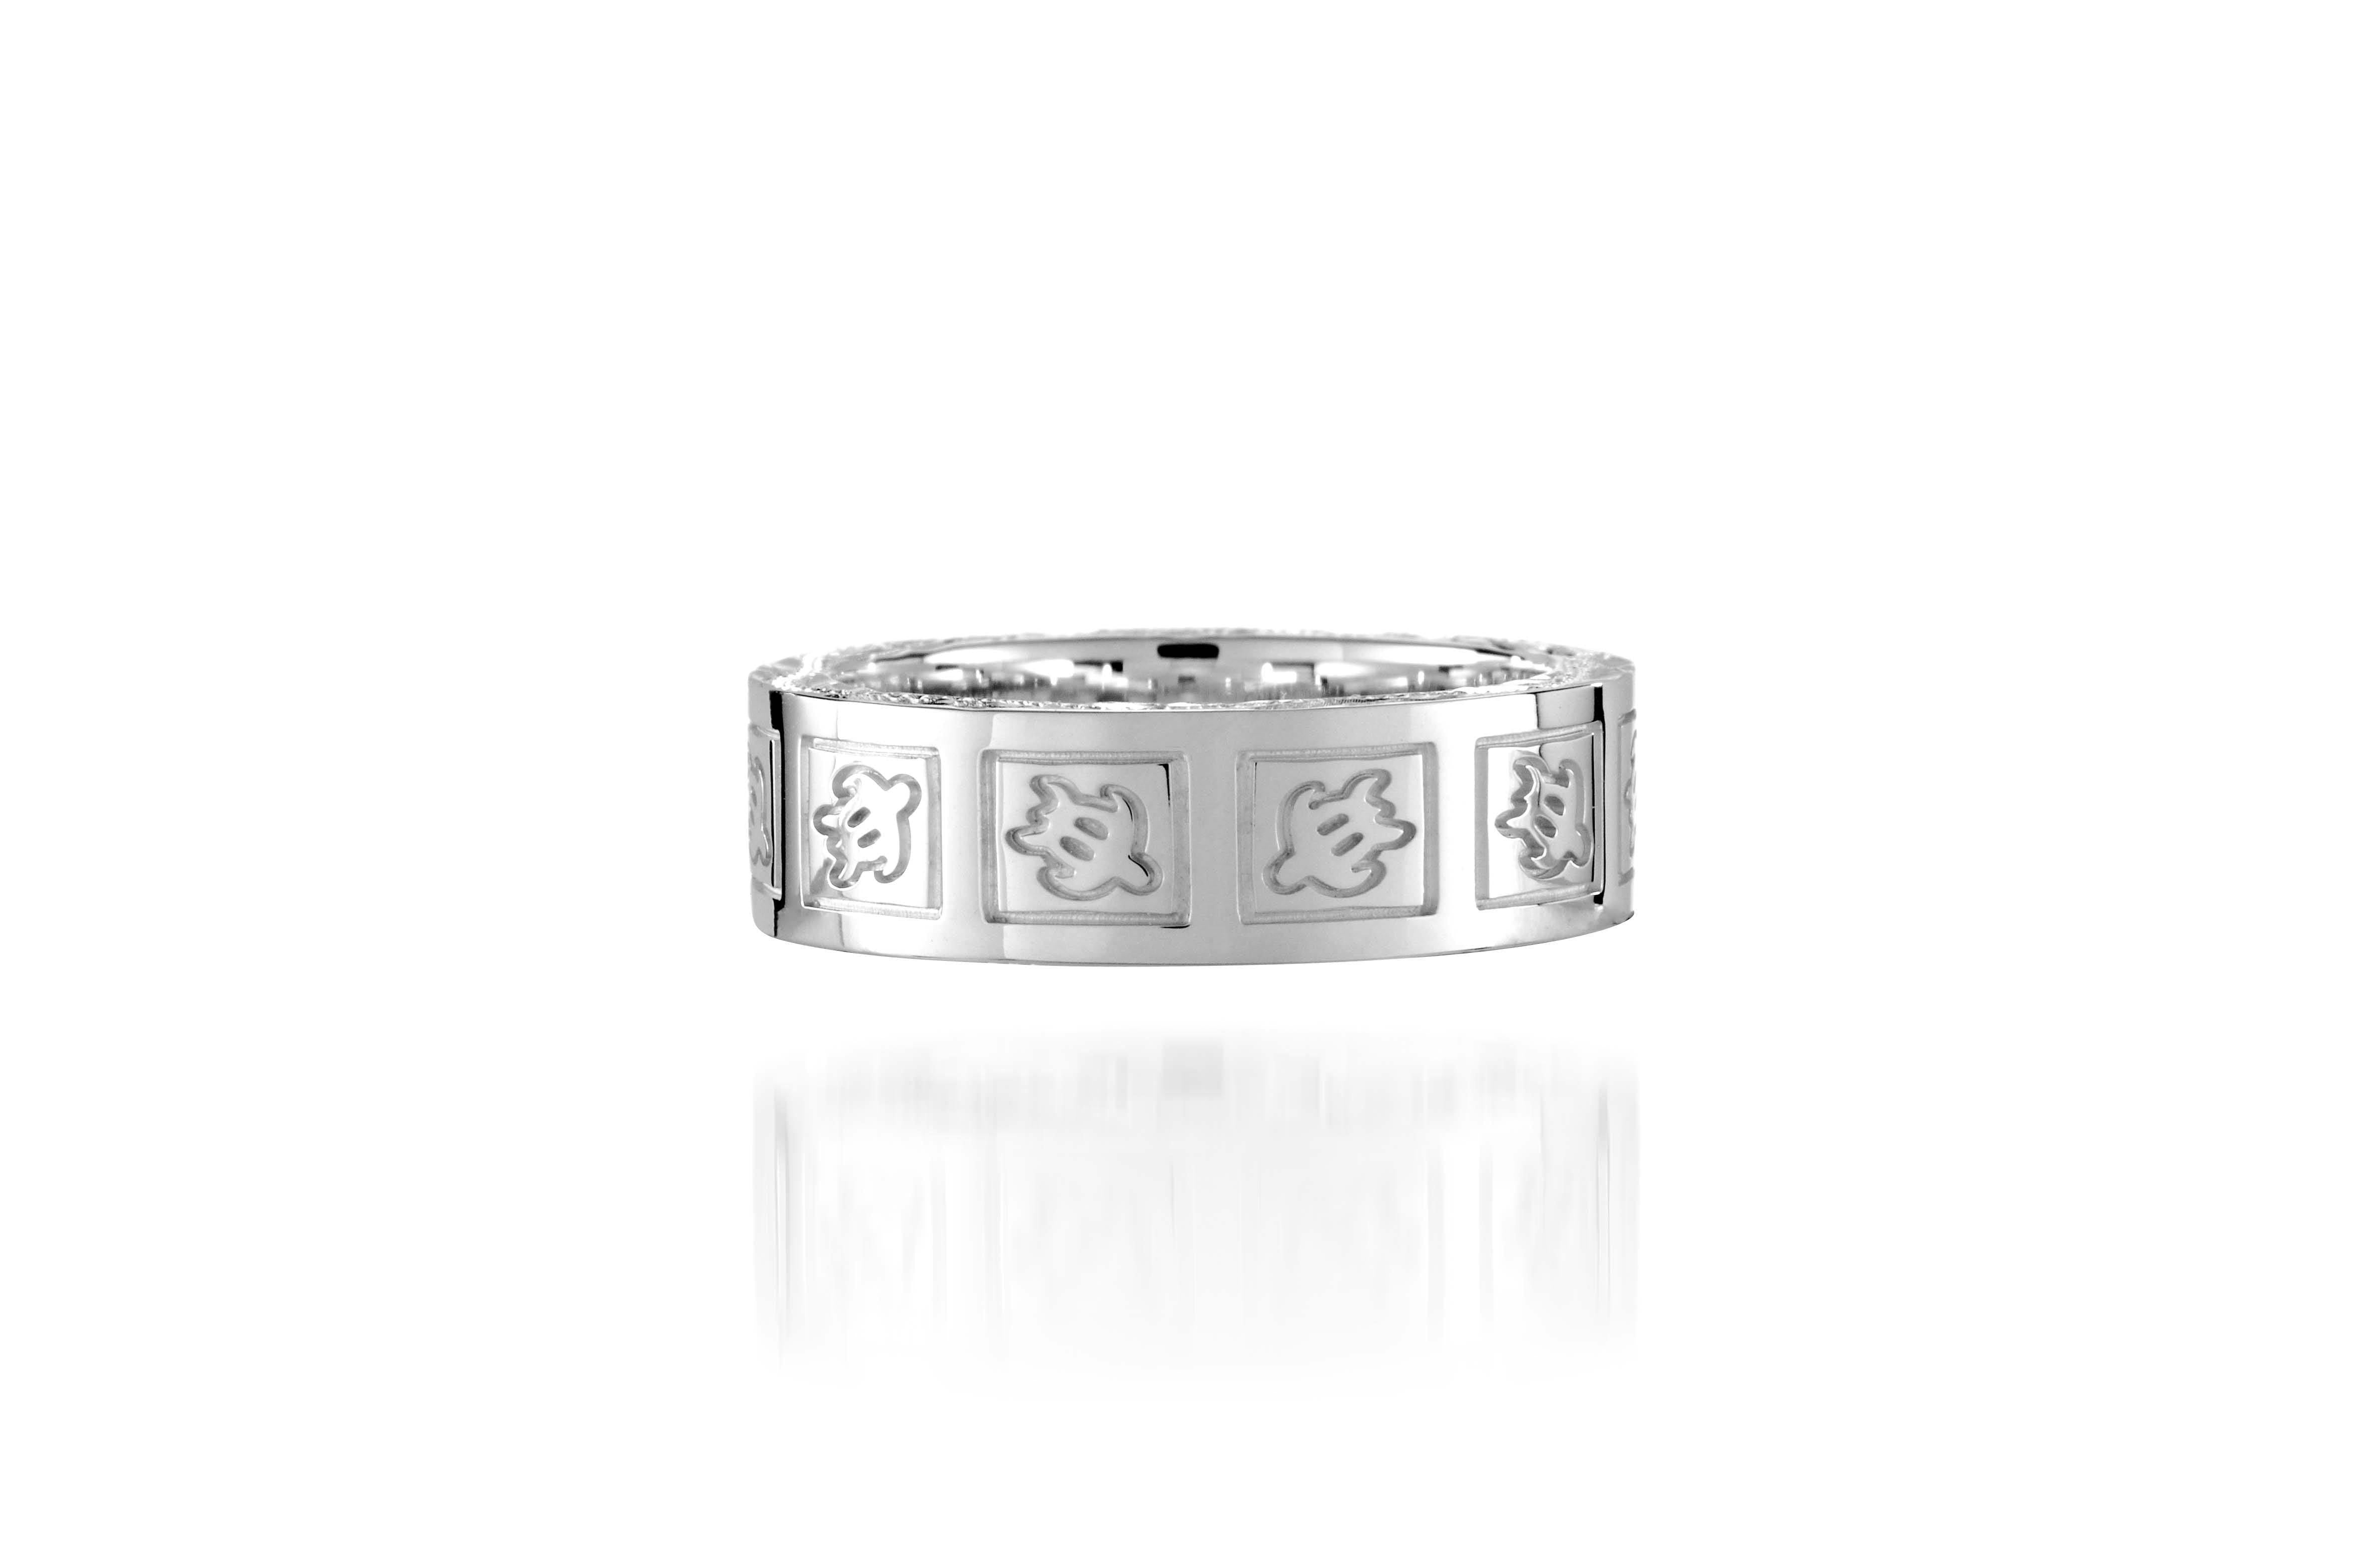 The picture shows a 925 sterling silver 6mm ring with hand engravings including sea turtles